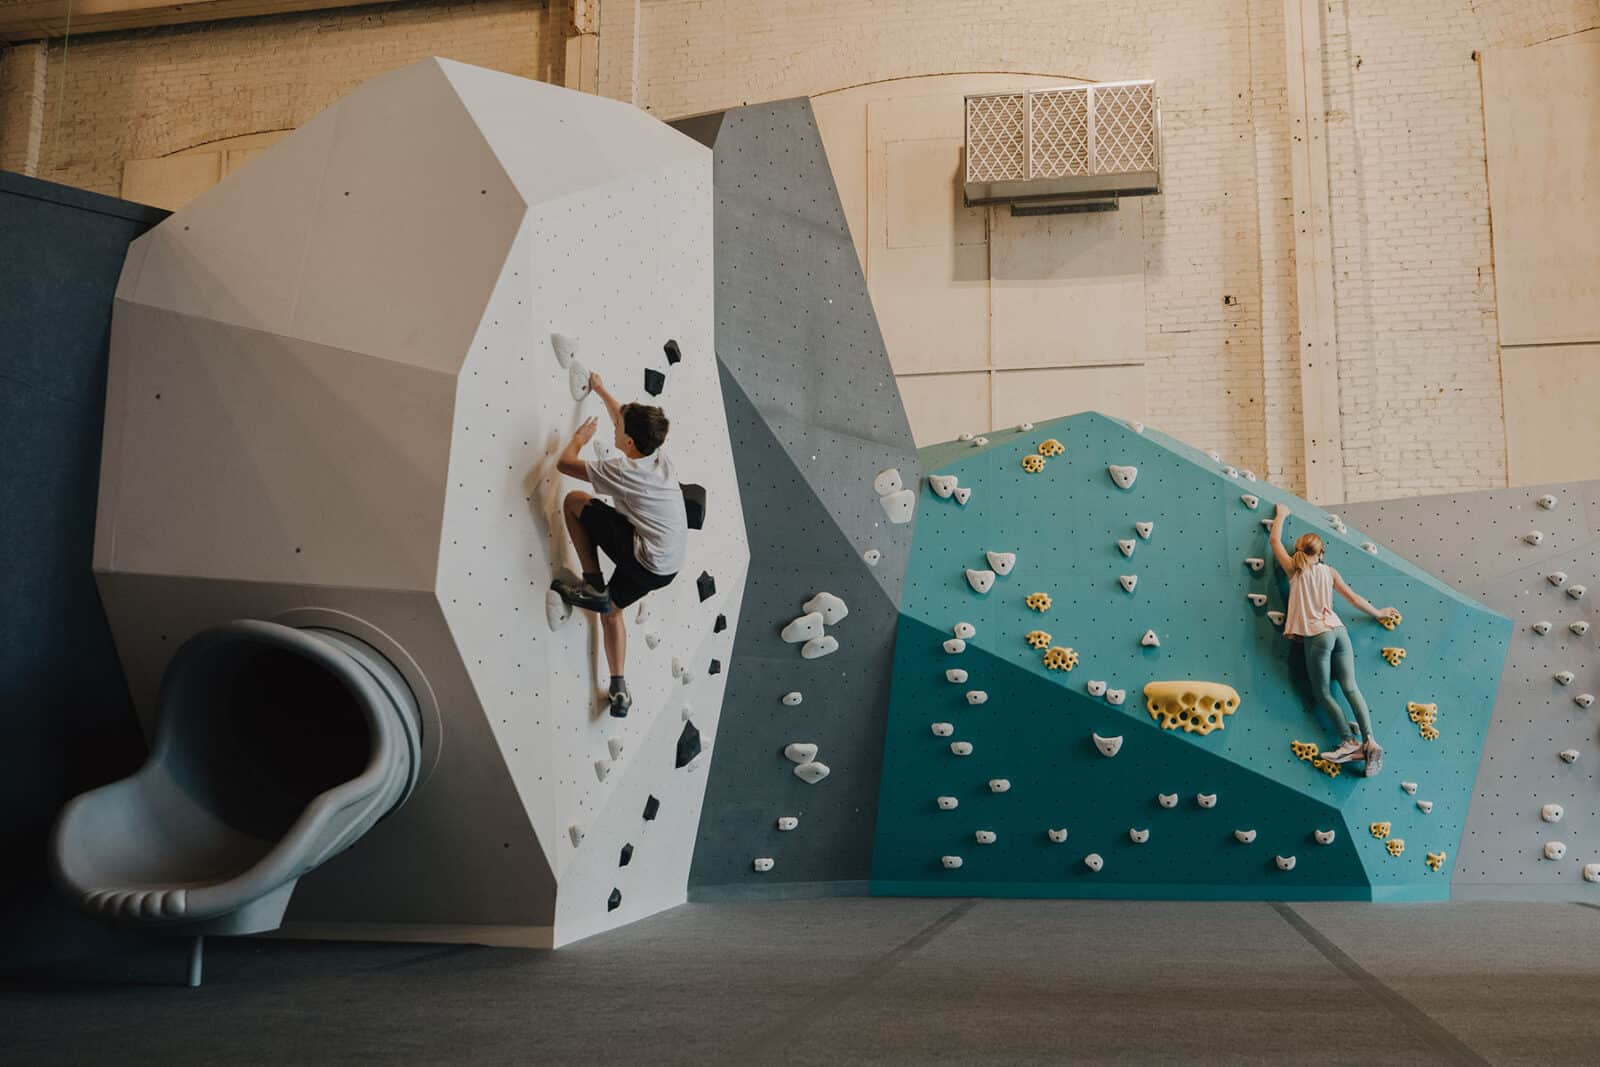 Two kids climb walls in the Gravity Lab in St. Charles.